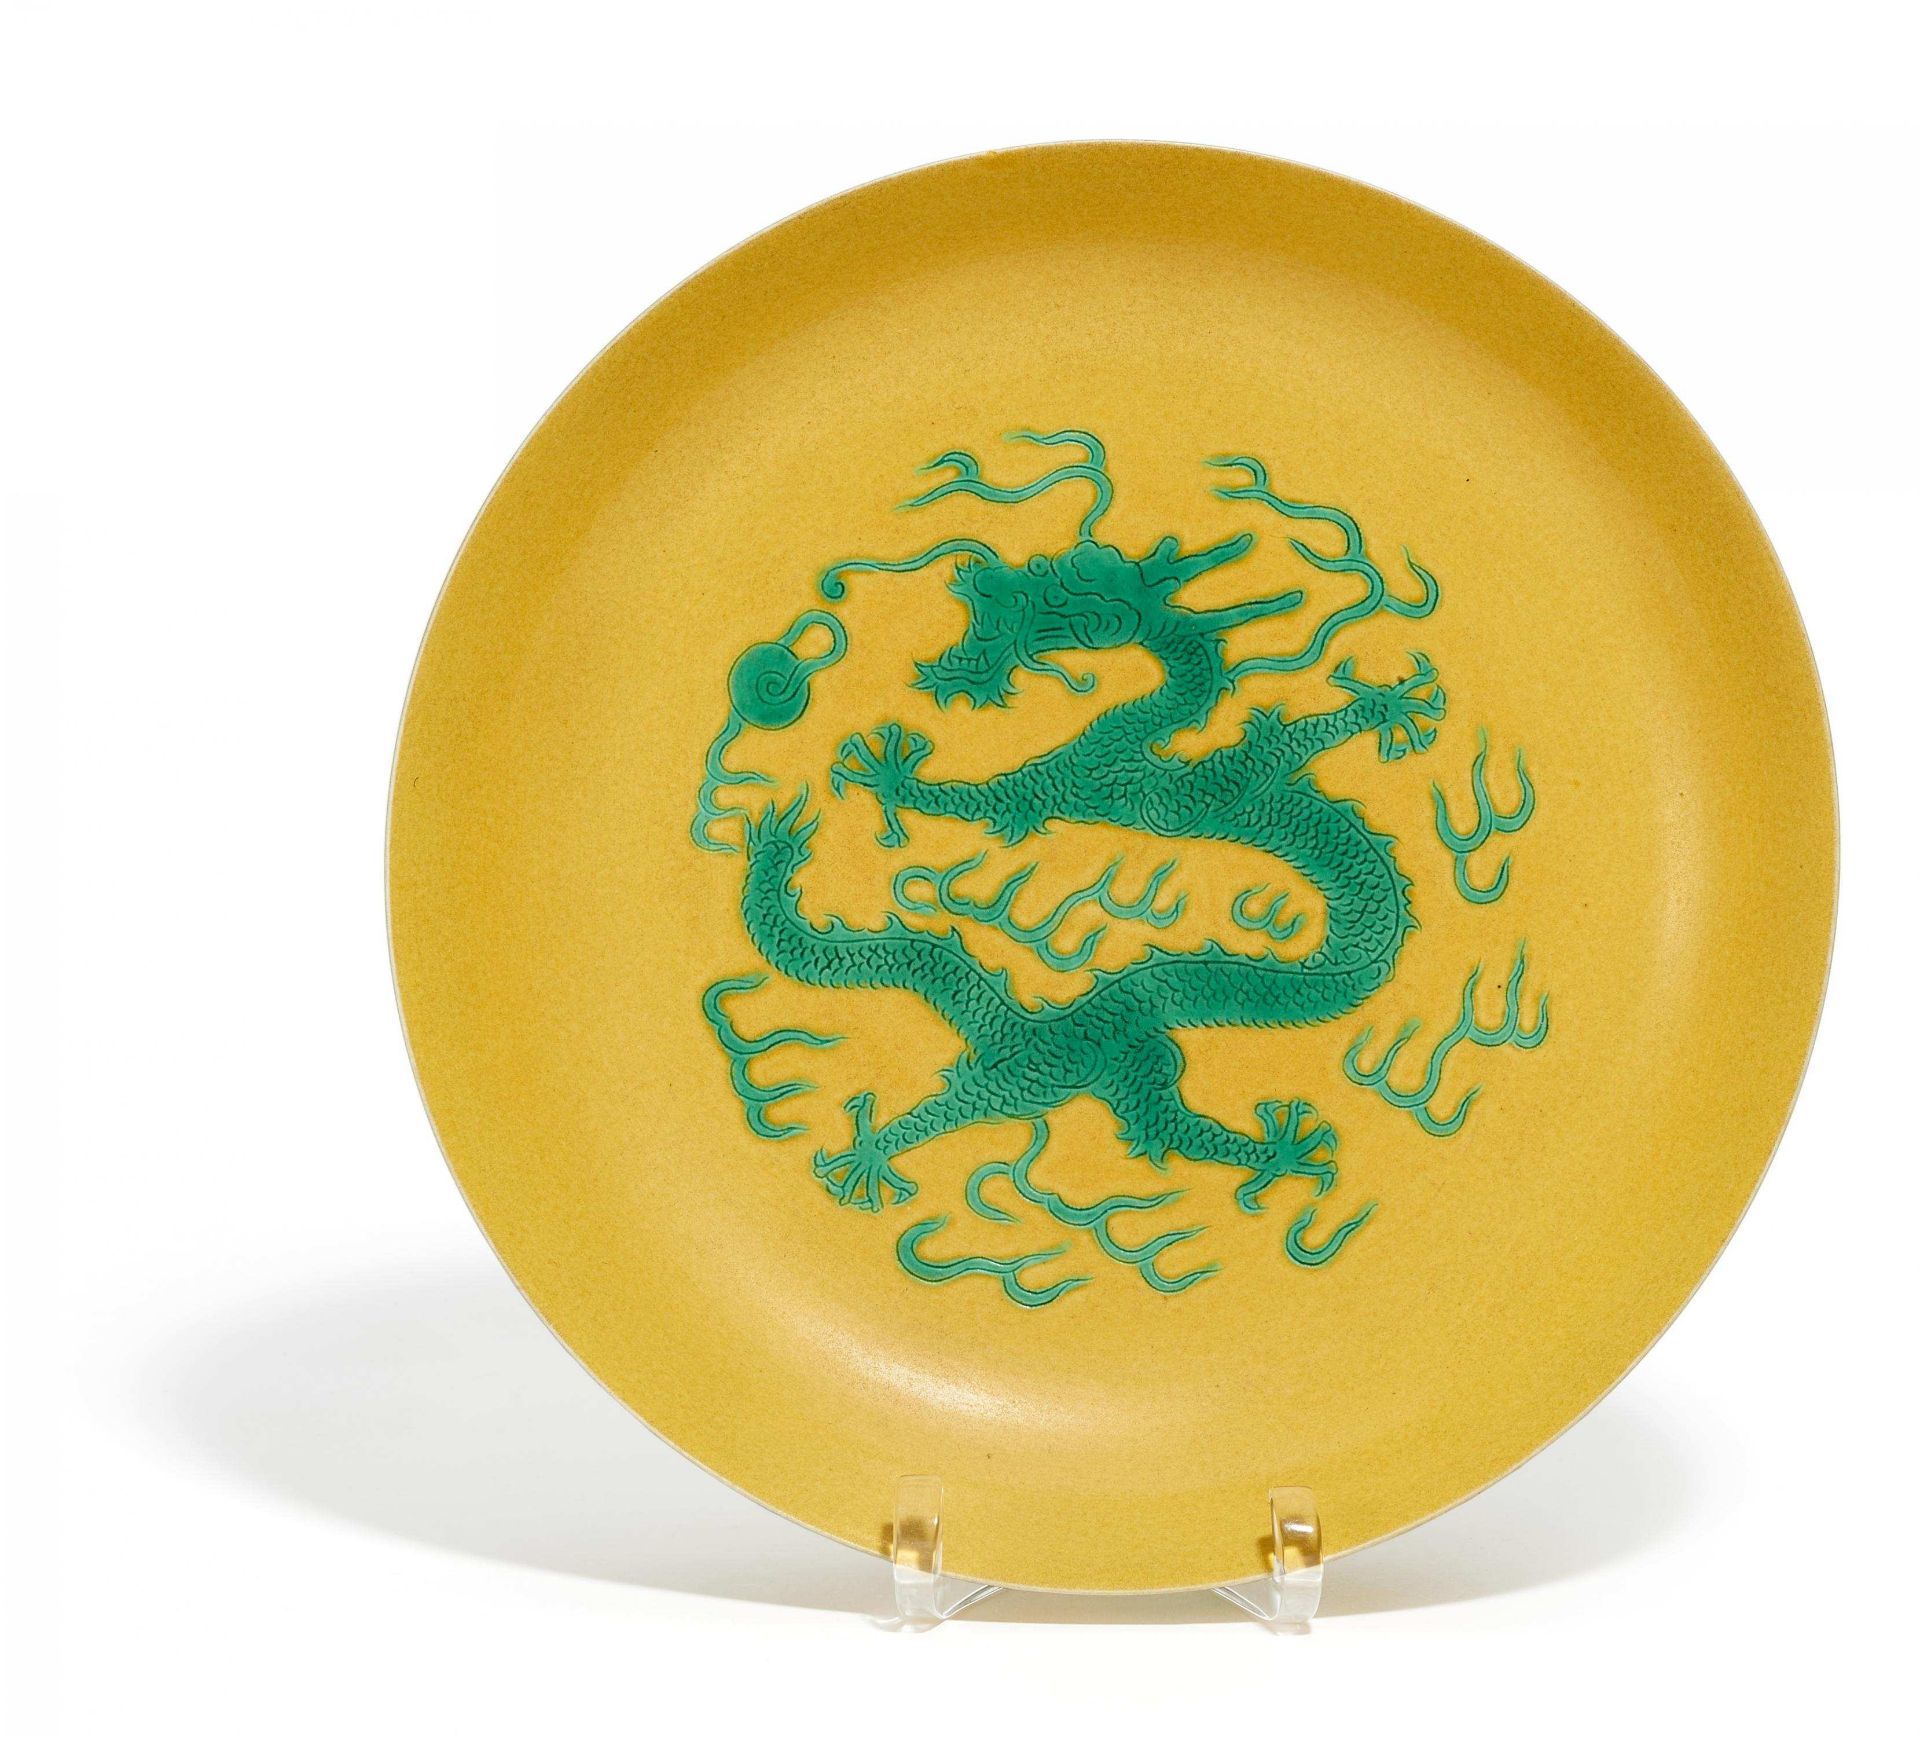 YELLOW PLATE WITH FIVE CLAWED DRAGONS. China. Qing dynasty. Prob. Guangxu period (1874-1908) or